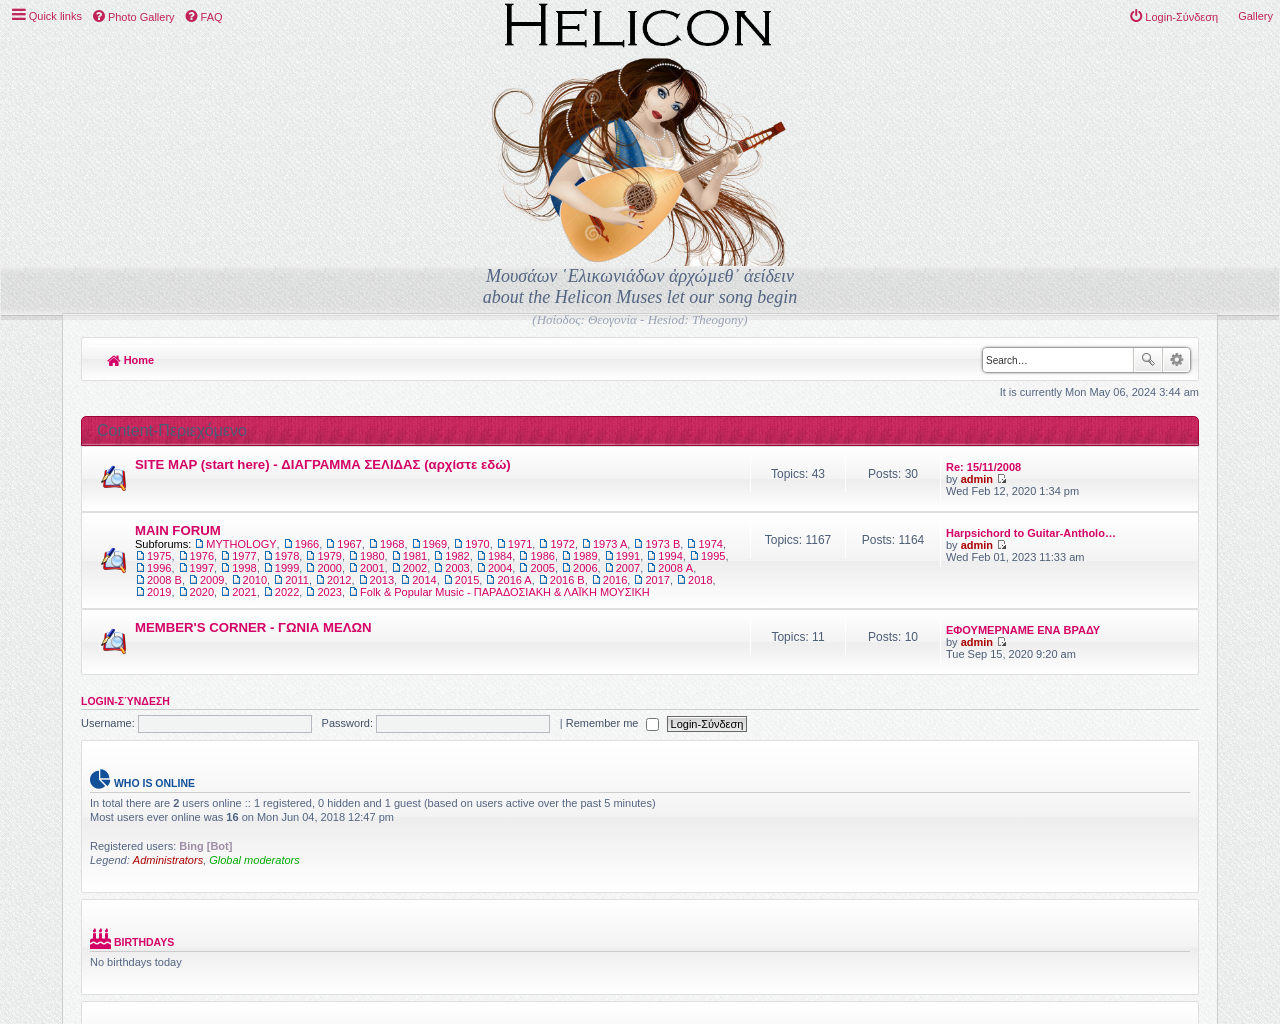 helicon.gr